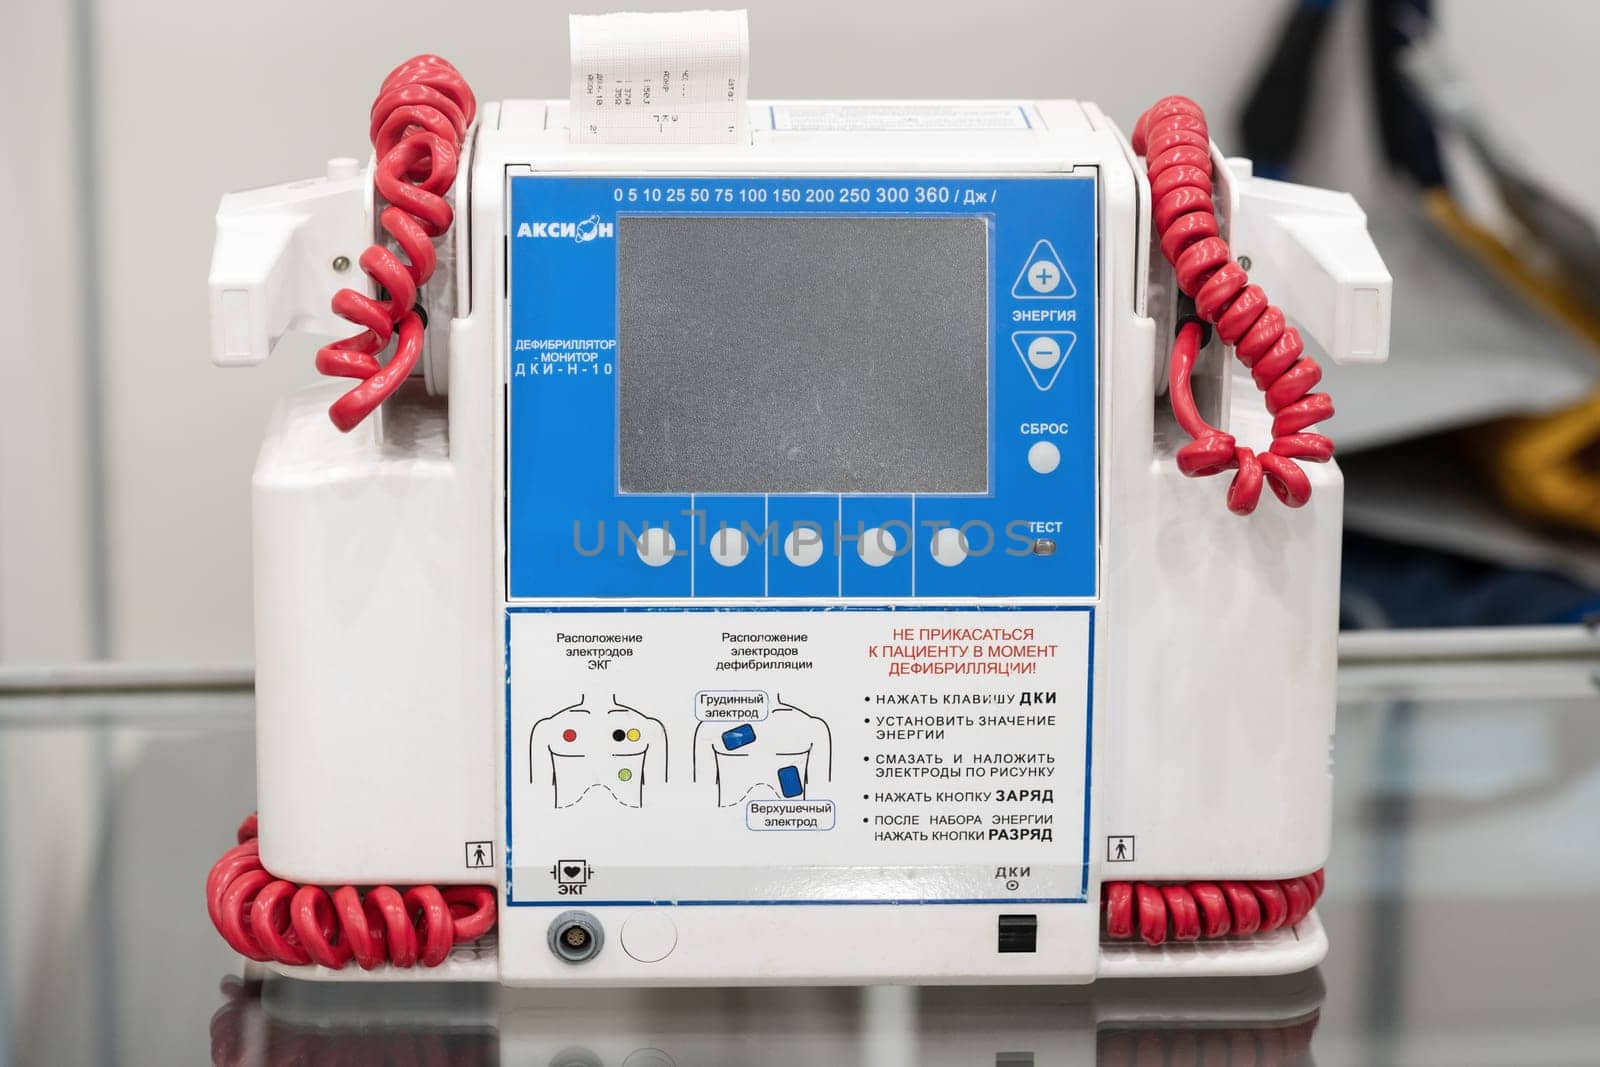 Russian portable defibrillator monitor Axion DKI-N-10 is used in medical hospitals, cardiological dispensaries, to equip emergency and emergency medical teams by Alexander-Piragis